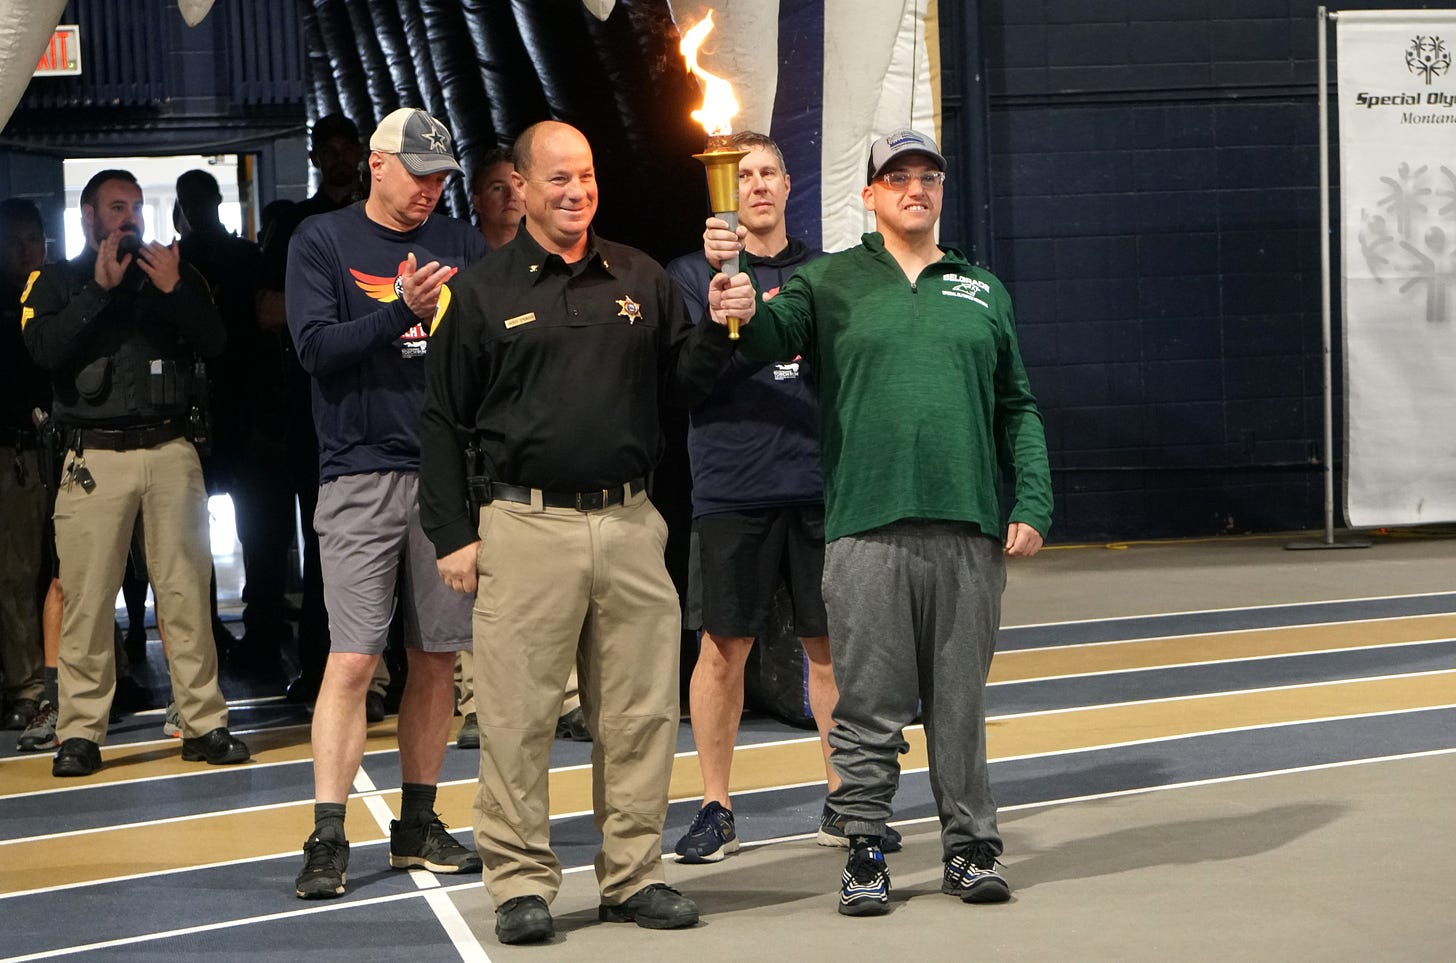 A Special Olympics athlete in a green shirt and gray pants holds the games torch with a law enforcement officer in a black shirt and beige pants and his sheriff’s badge on his chest. Both are smiling. There are several other law enforcement officers behind them smiling and clapping.